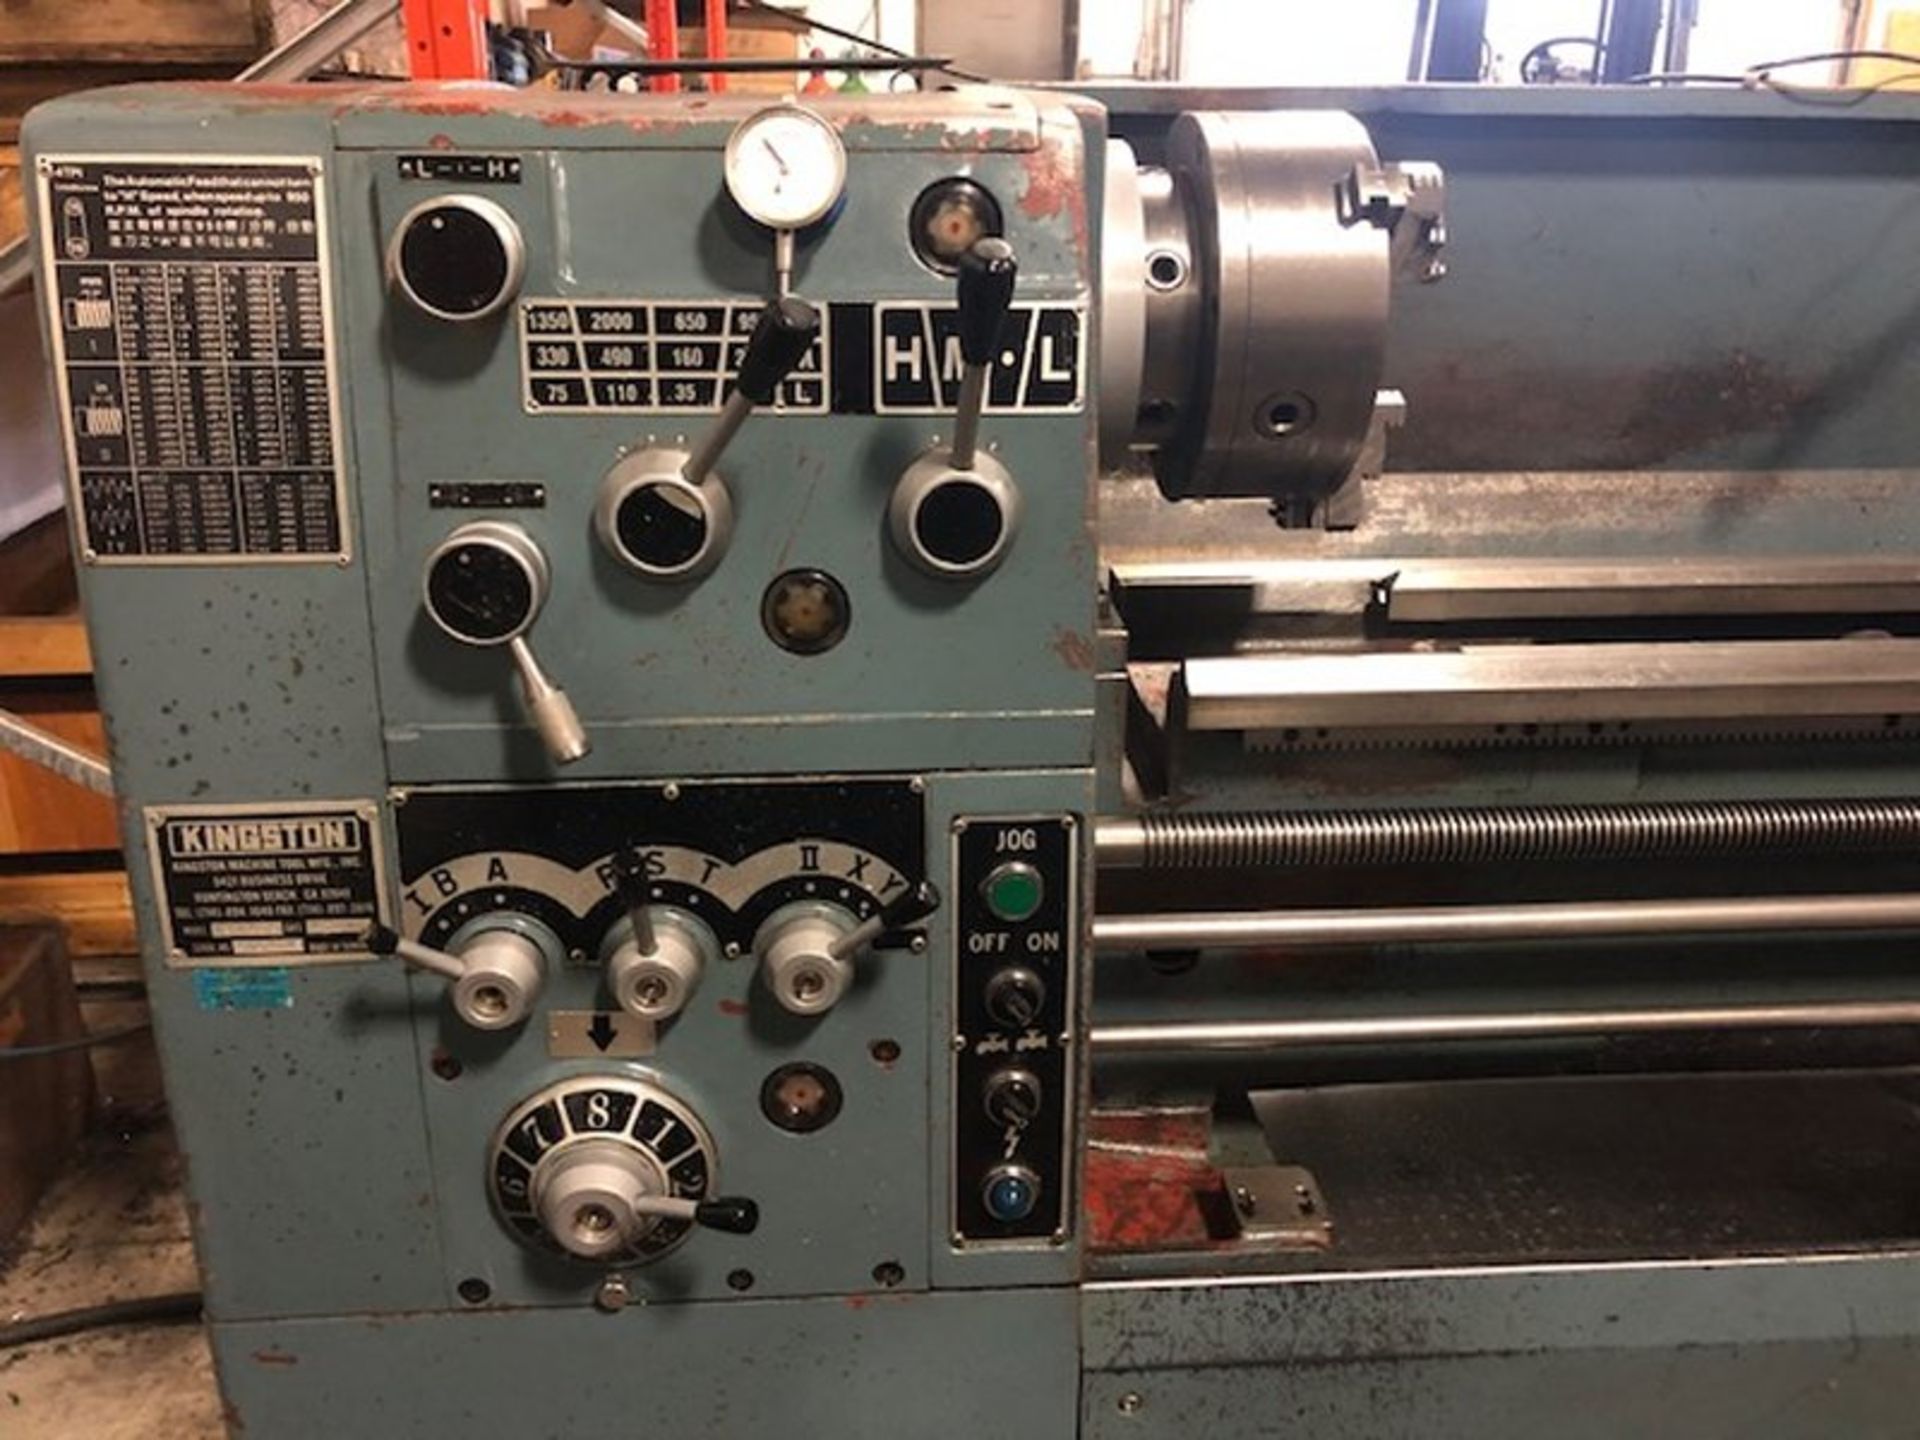 KINGSTON MODEL HJ-1100 TOOL ROOM LATHE, 2004, S/N CH04219 16IN X 40IN, NEWAL 2 AXIS DIGITAL READOUT - Image 3 of 5